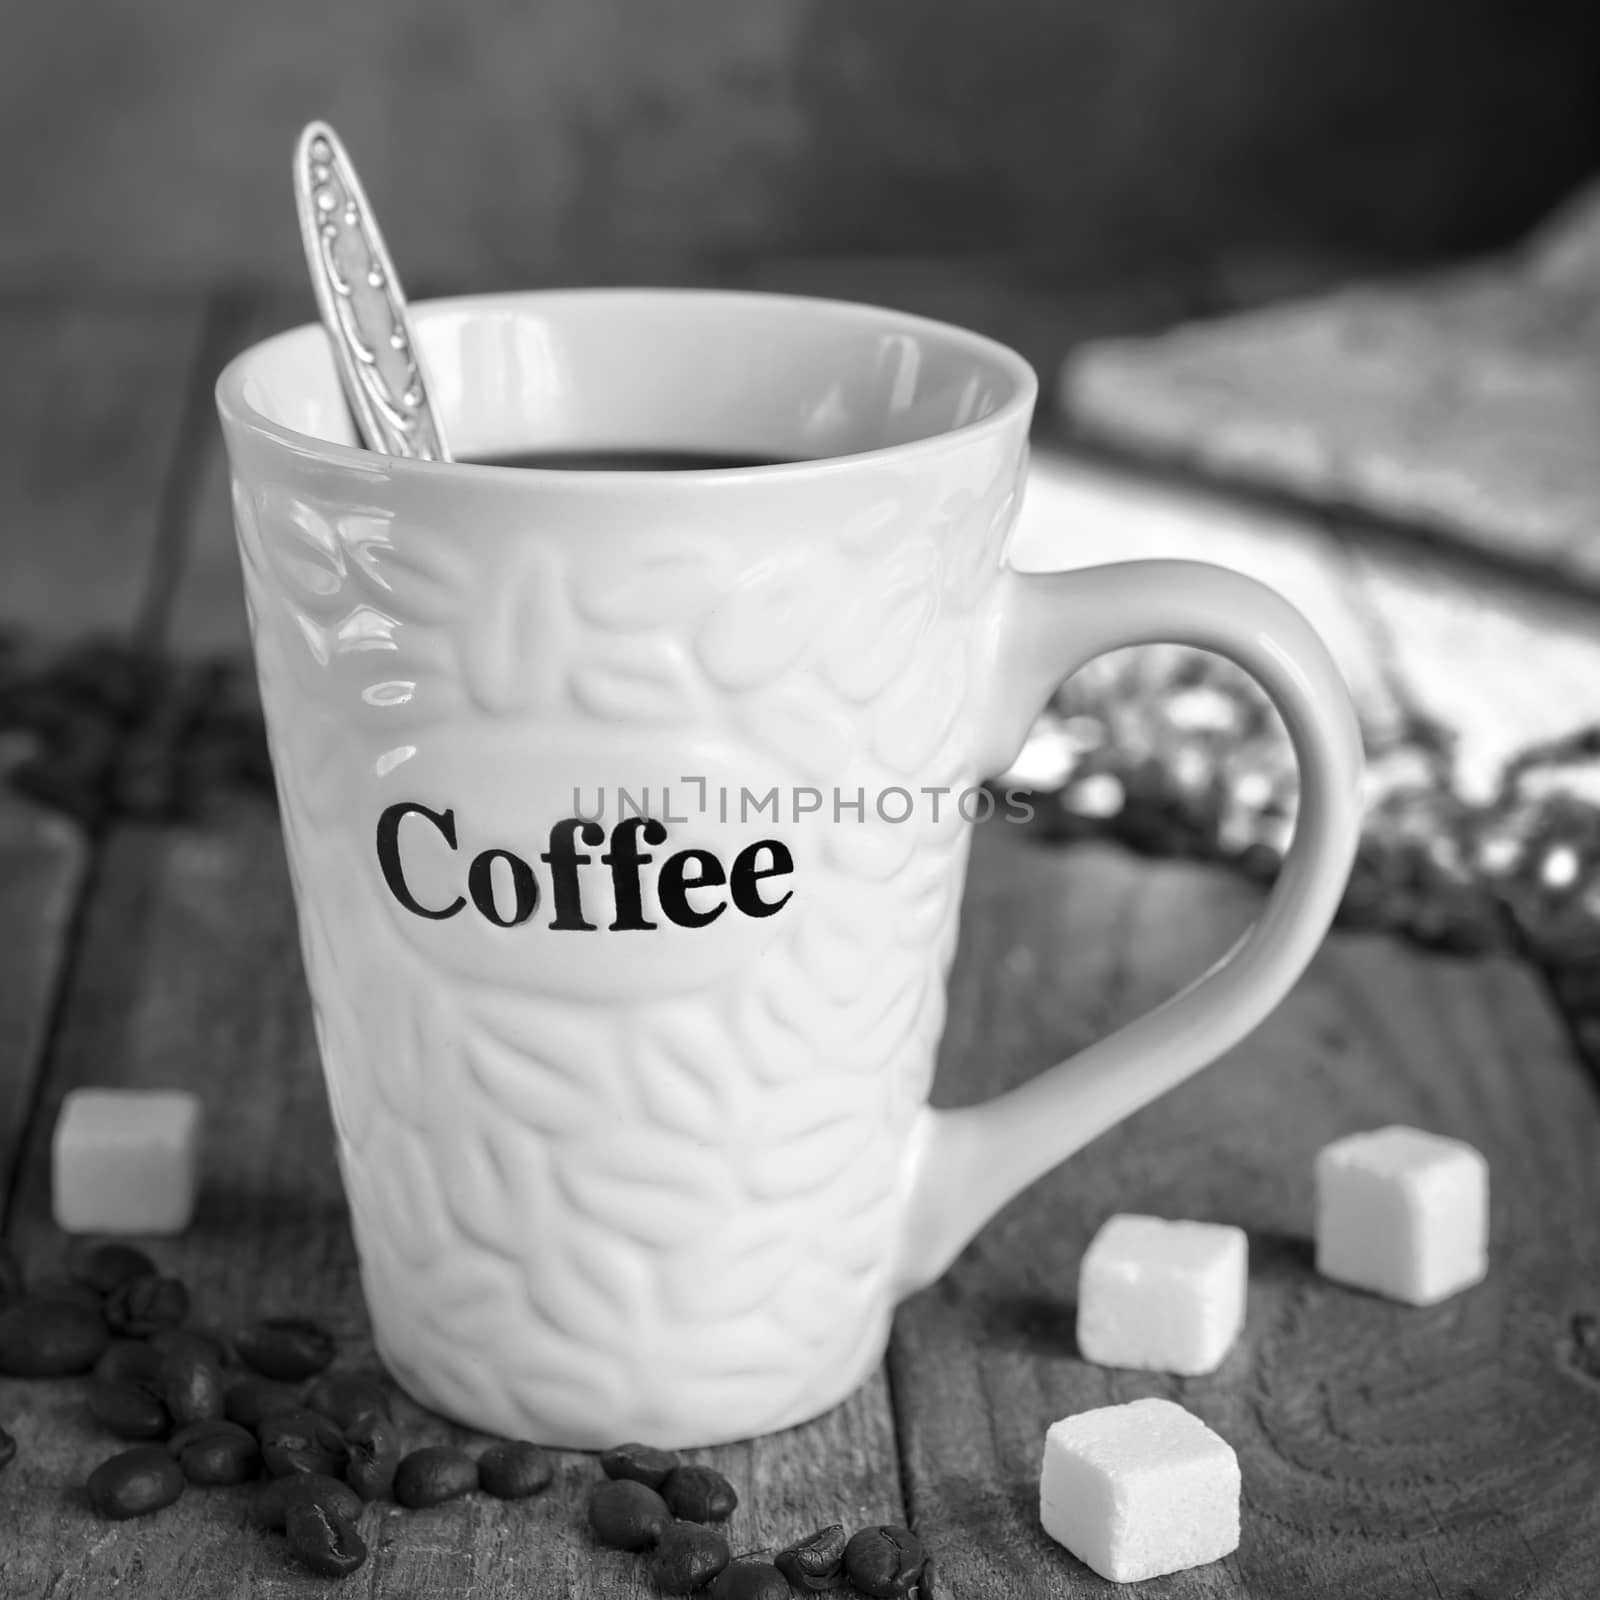 Mug of coffee on the old Board, spilled coffee beans and sugar cubes. Morning light. Black and white